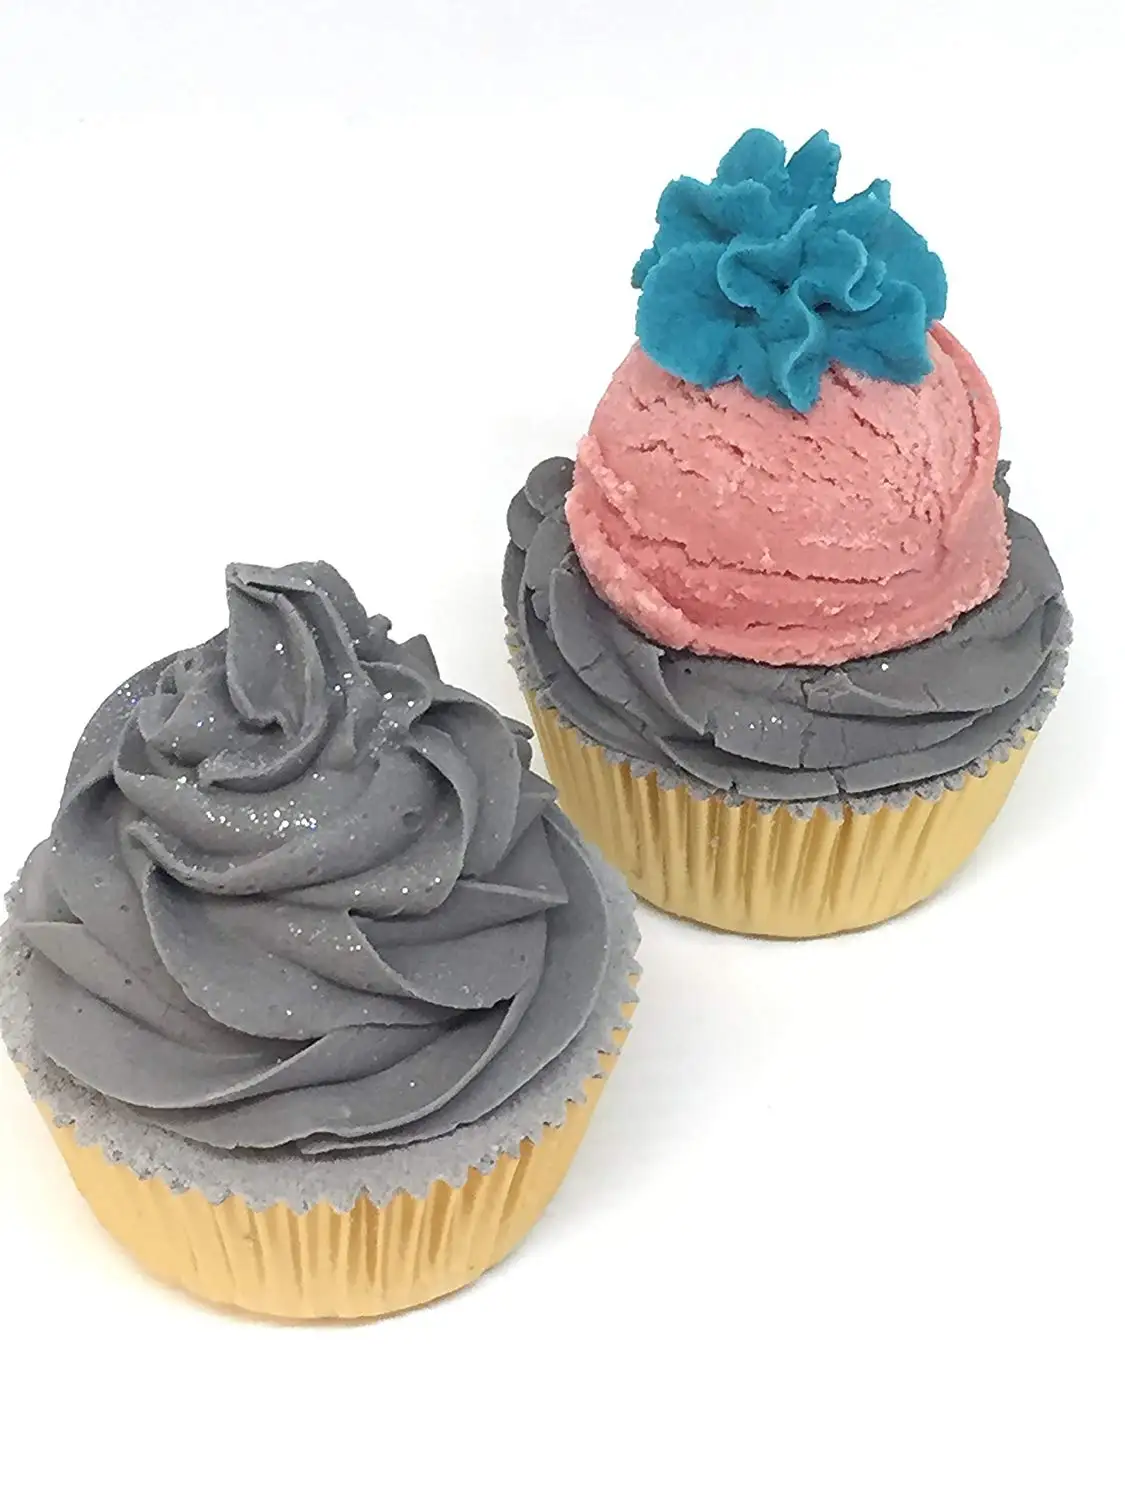 Cheap Cupcake Scoop, find Cupcake Scoop deals on line at Alibaba.com